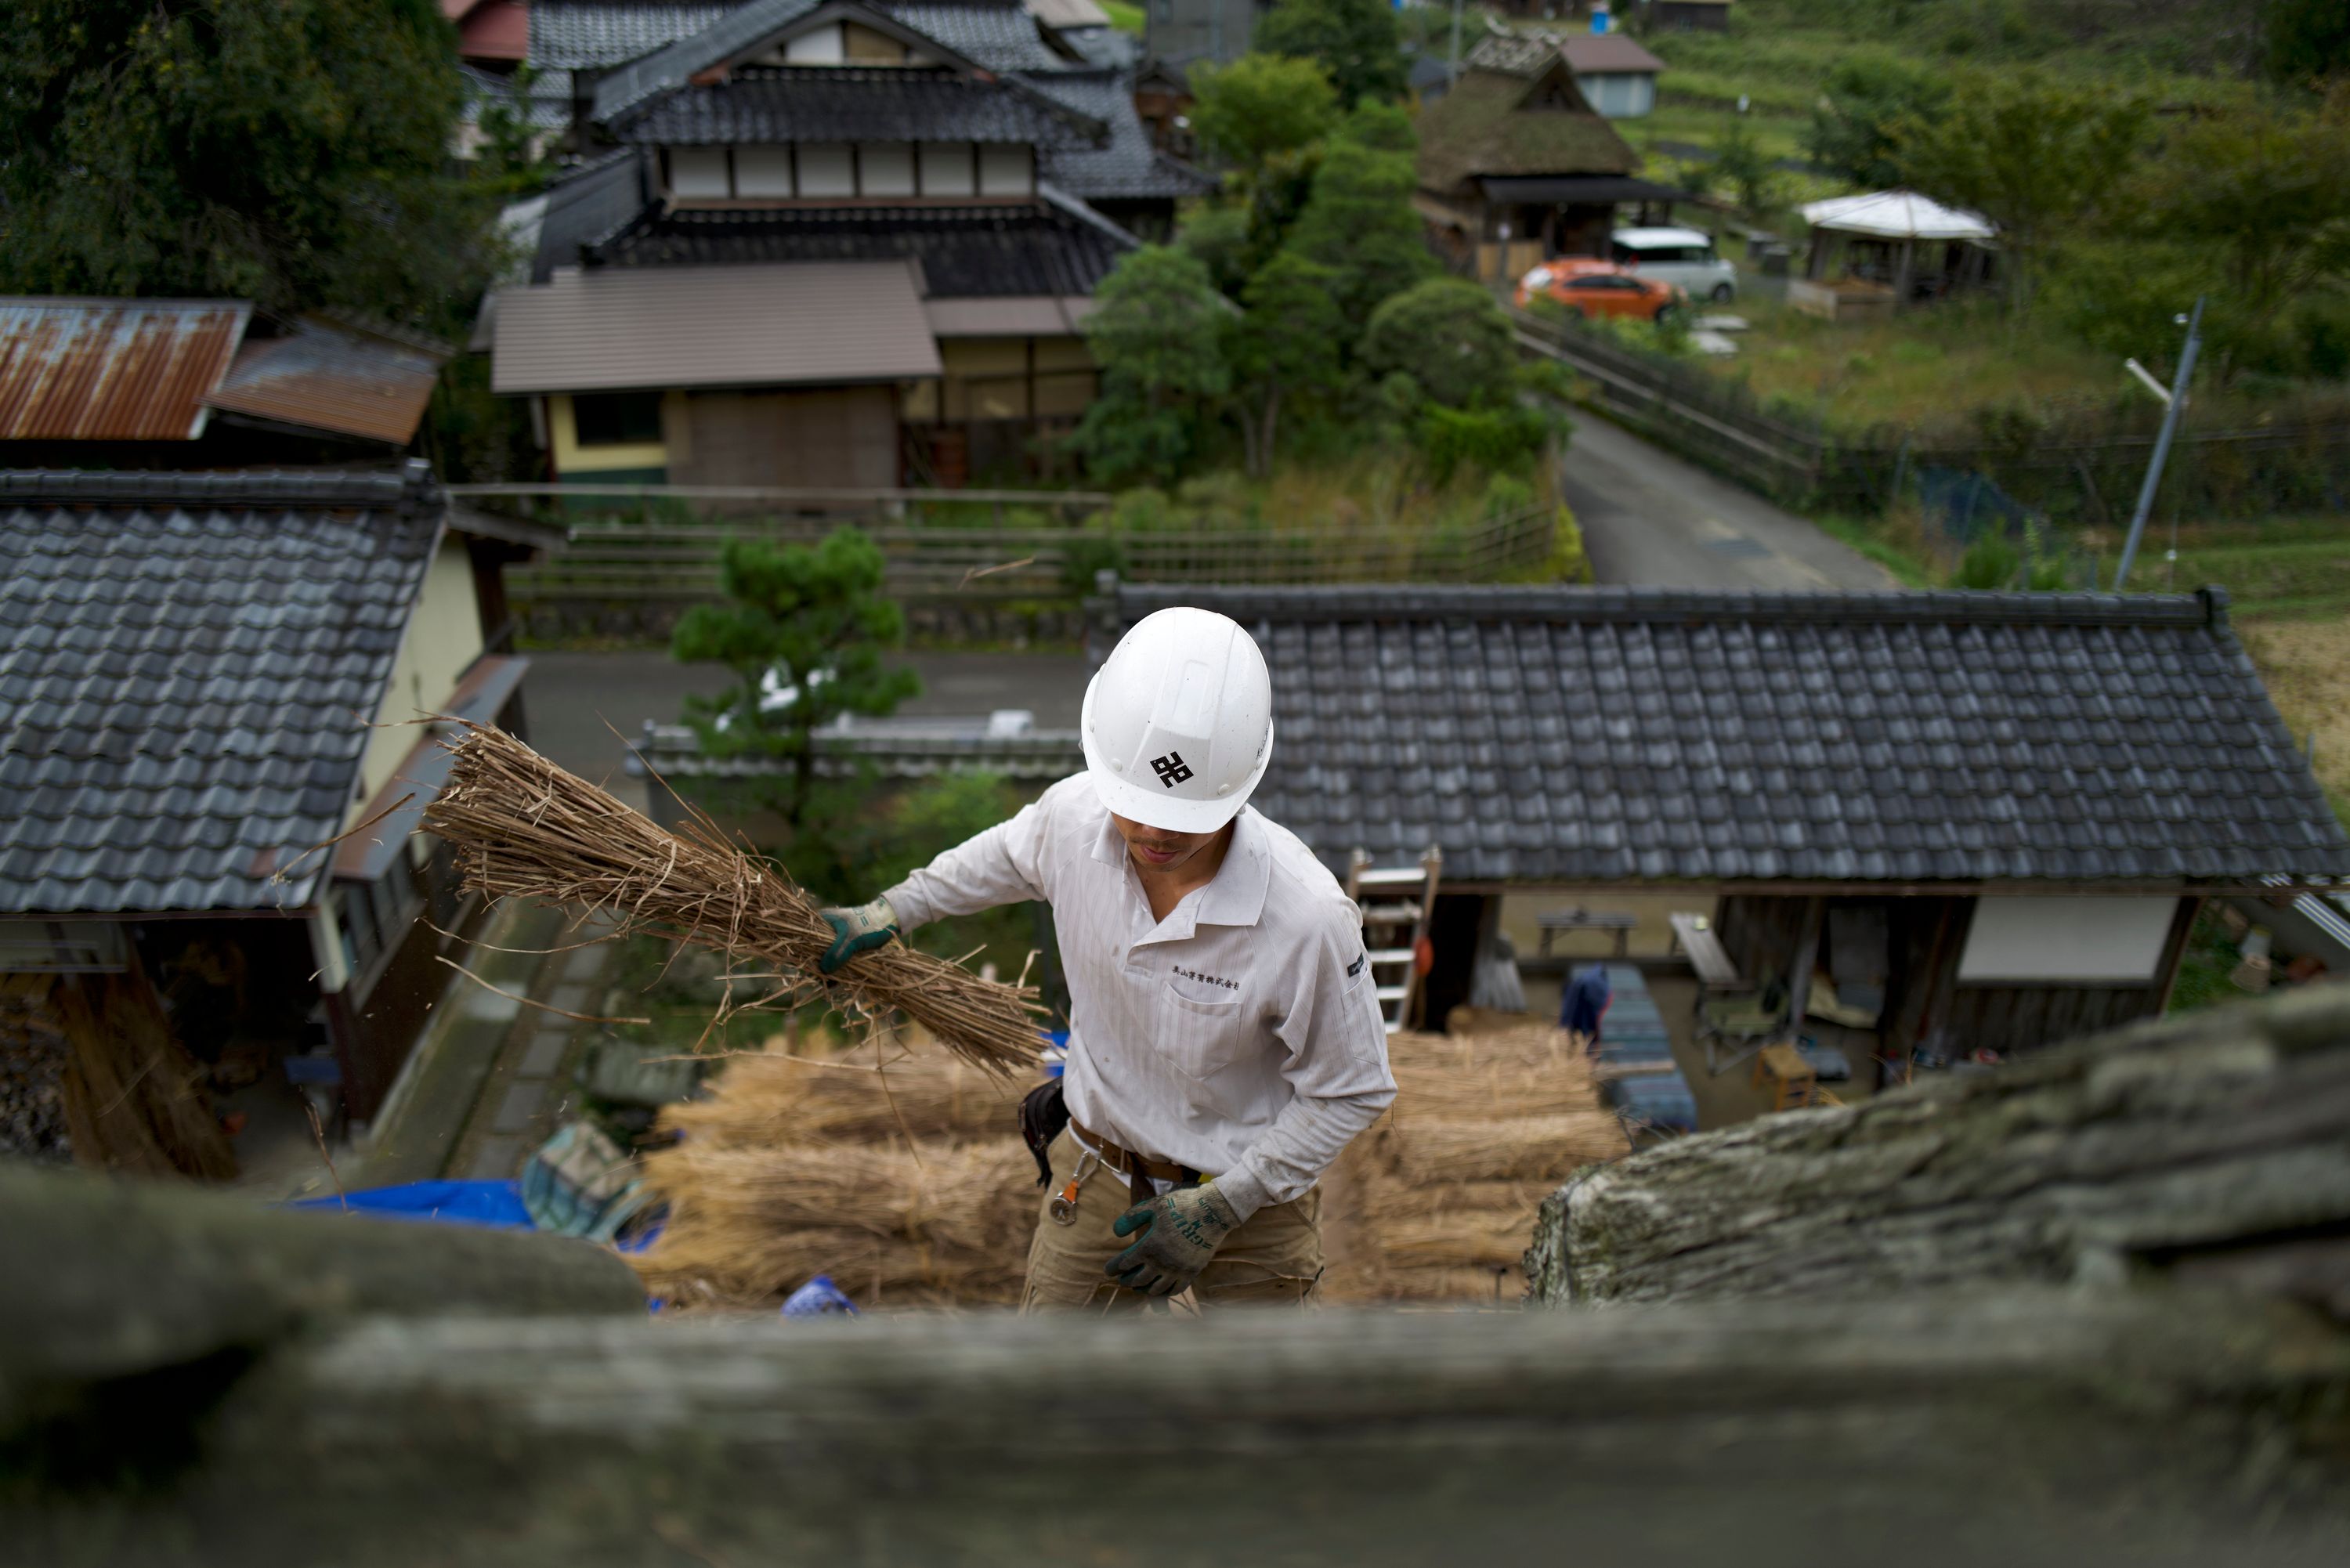 A thatcher works on the roof of a traditional Japanese house